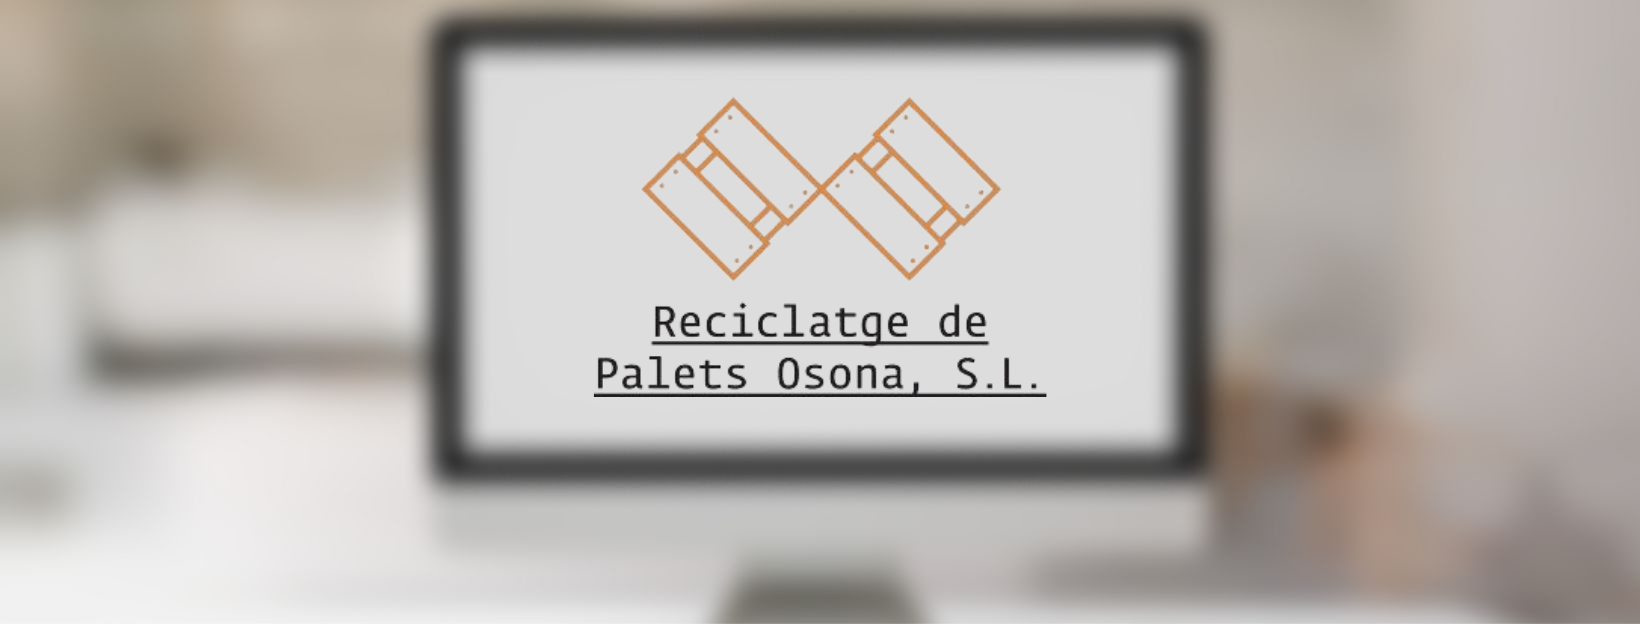 SEO for Palets Osona’s website: Boosting online visibility